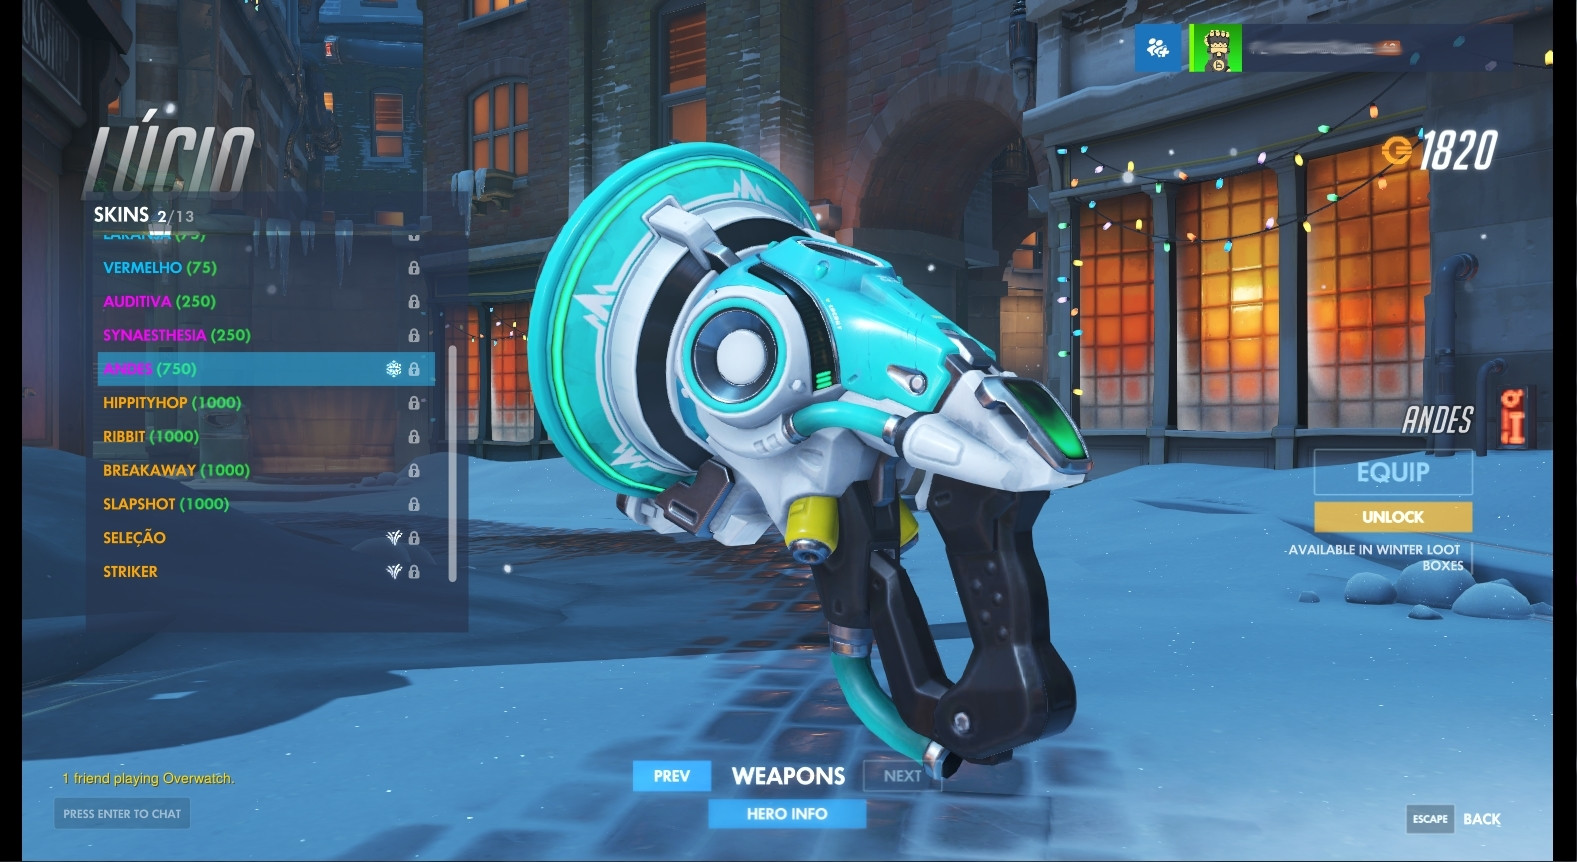 Lucio (Andes) Weapon